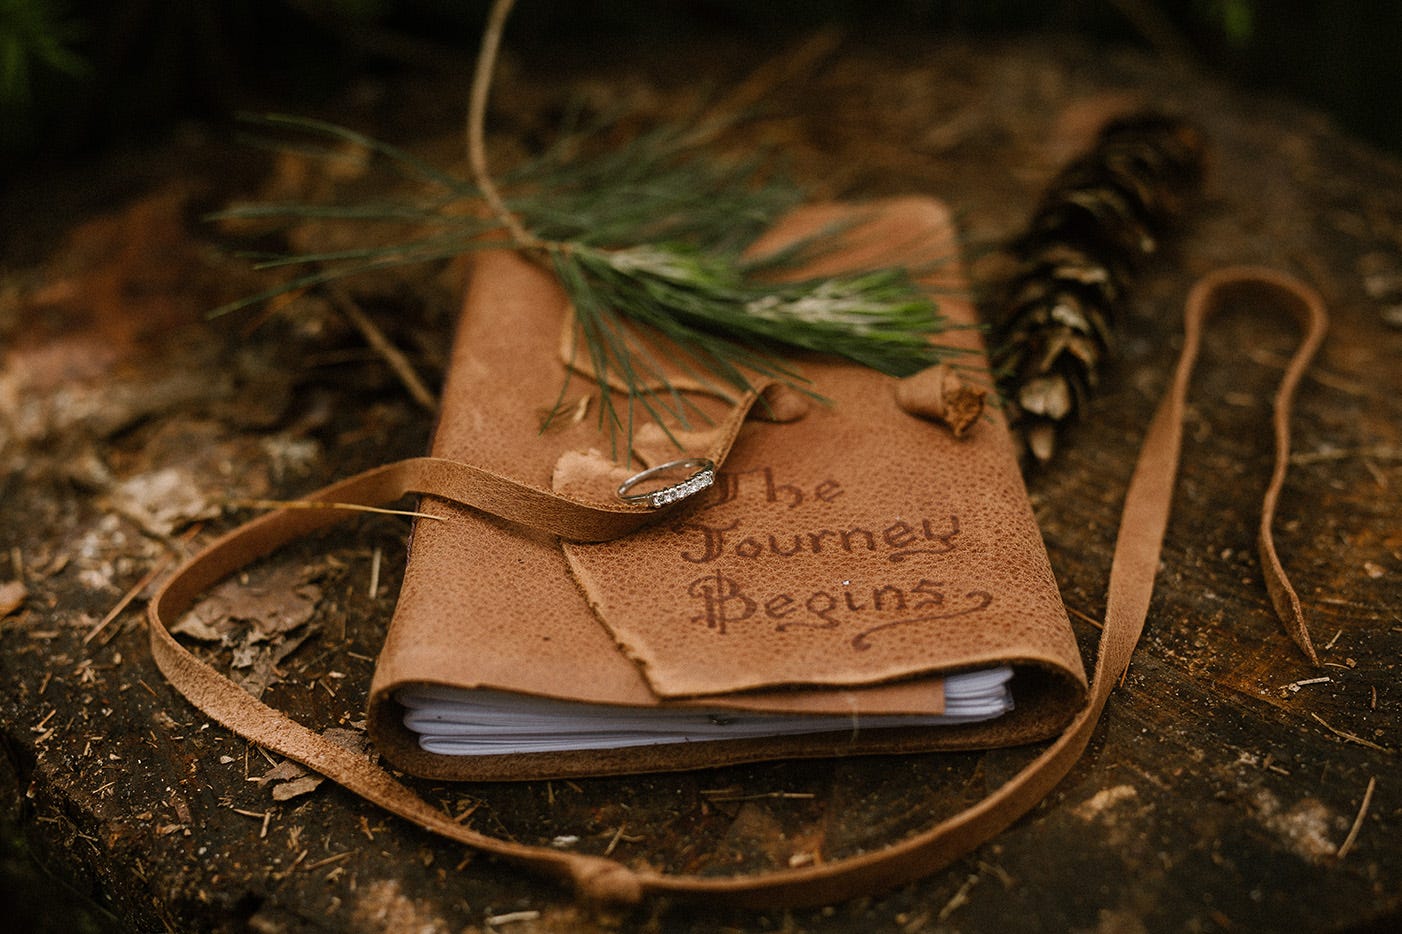 A leather journal lies on the ground amid fallen leaves and a spring of pine placed across it. On its cover is embossed the text “The Journey Begins”.